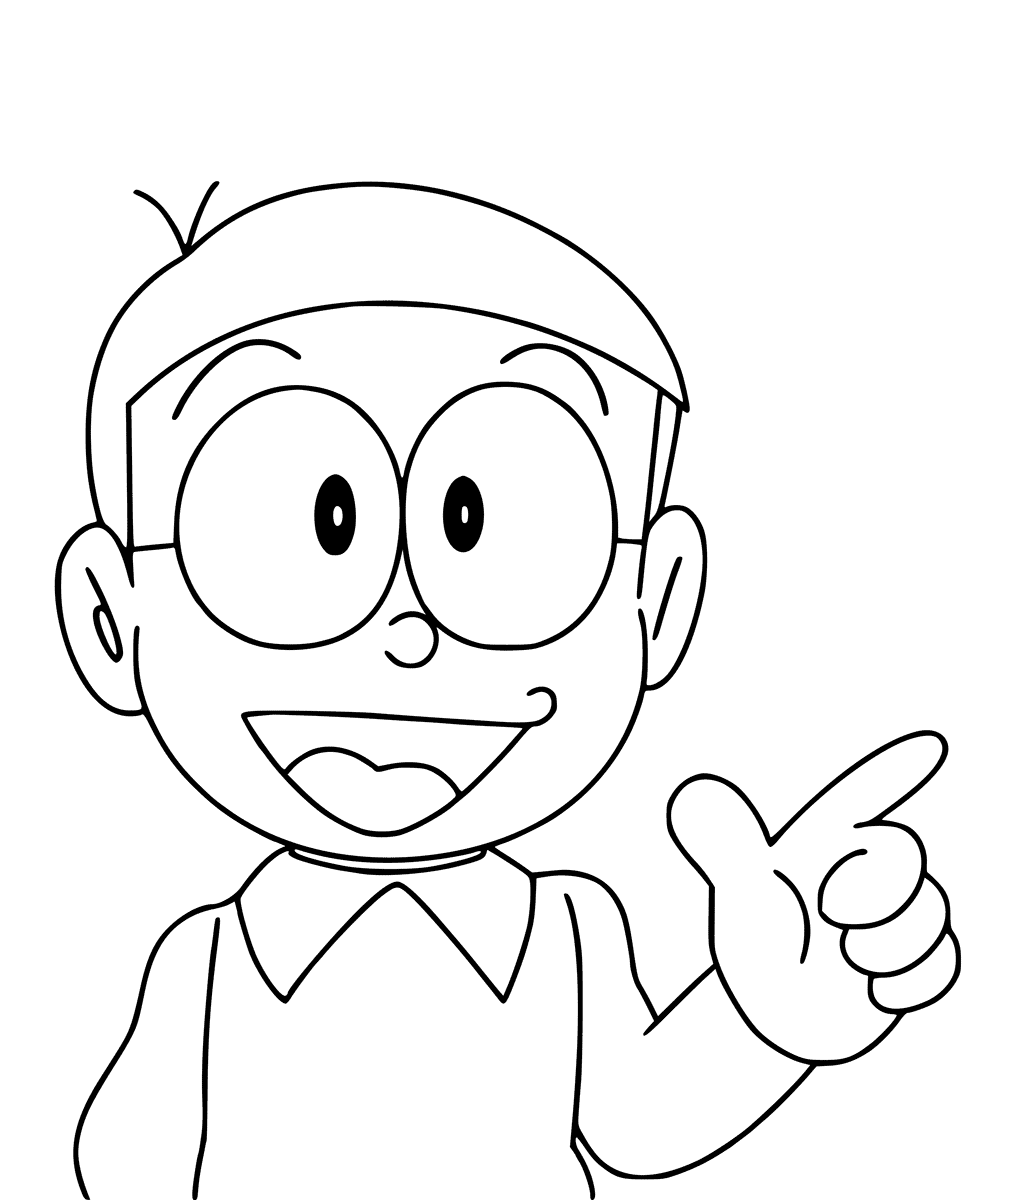 Nobita coloring pages